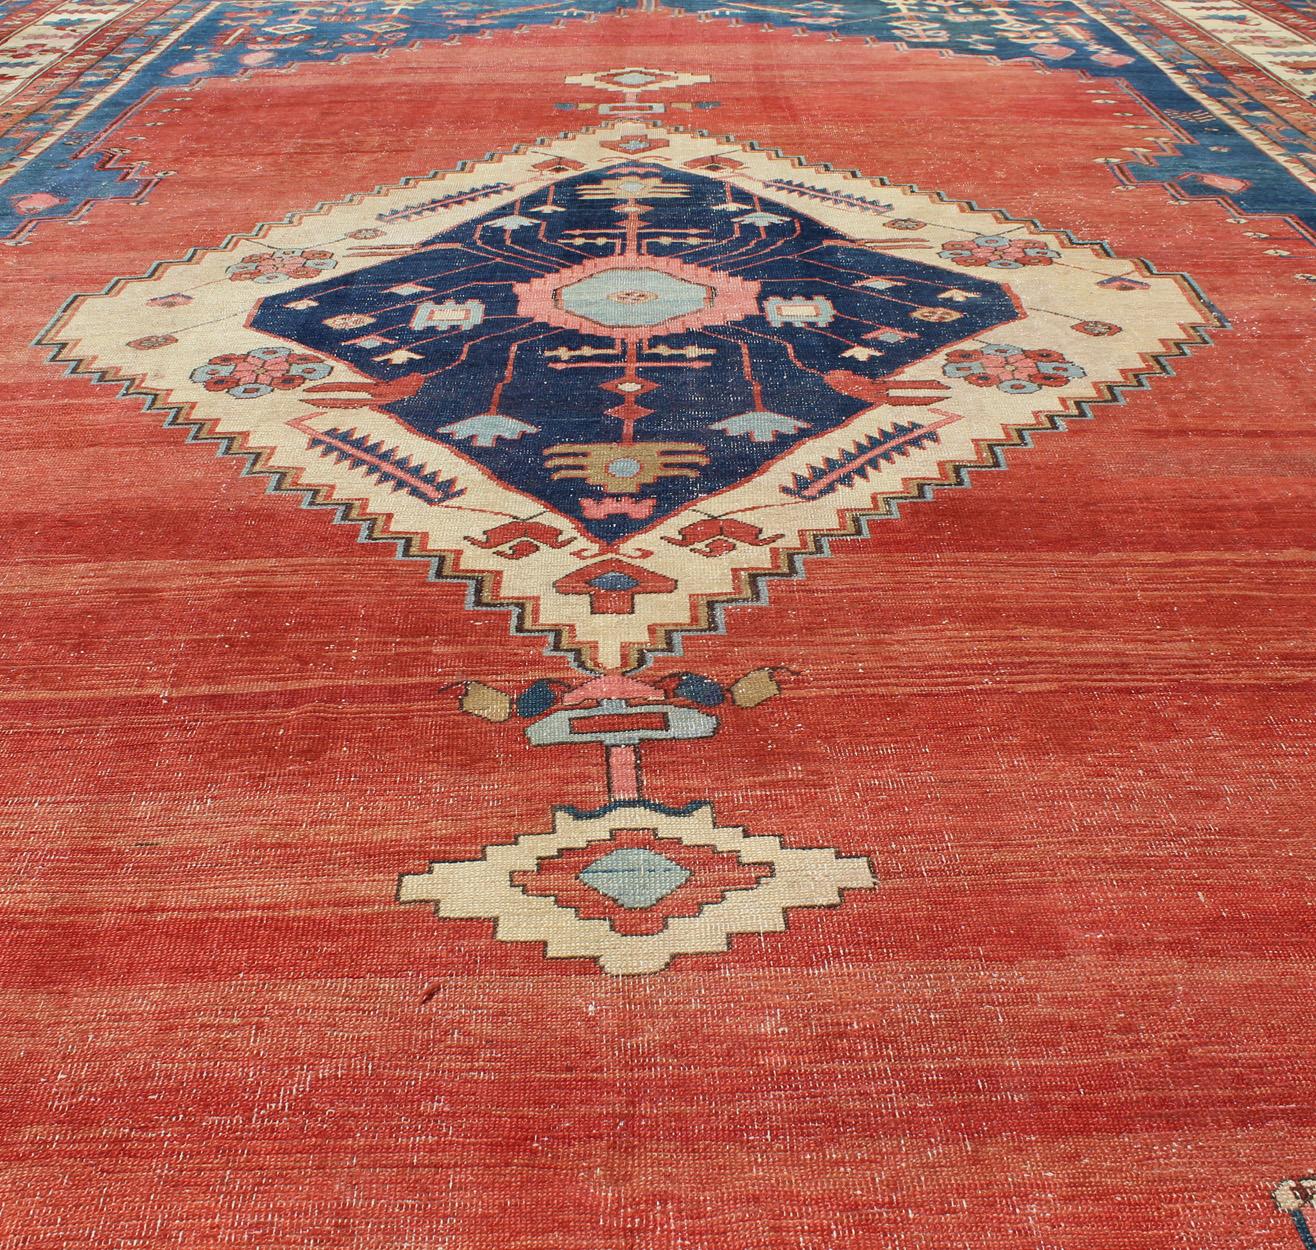 Finely Woven 19th Century Antique Persian Bakhshaiesh Rug in Rust Red and Blue For Sale 4